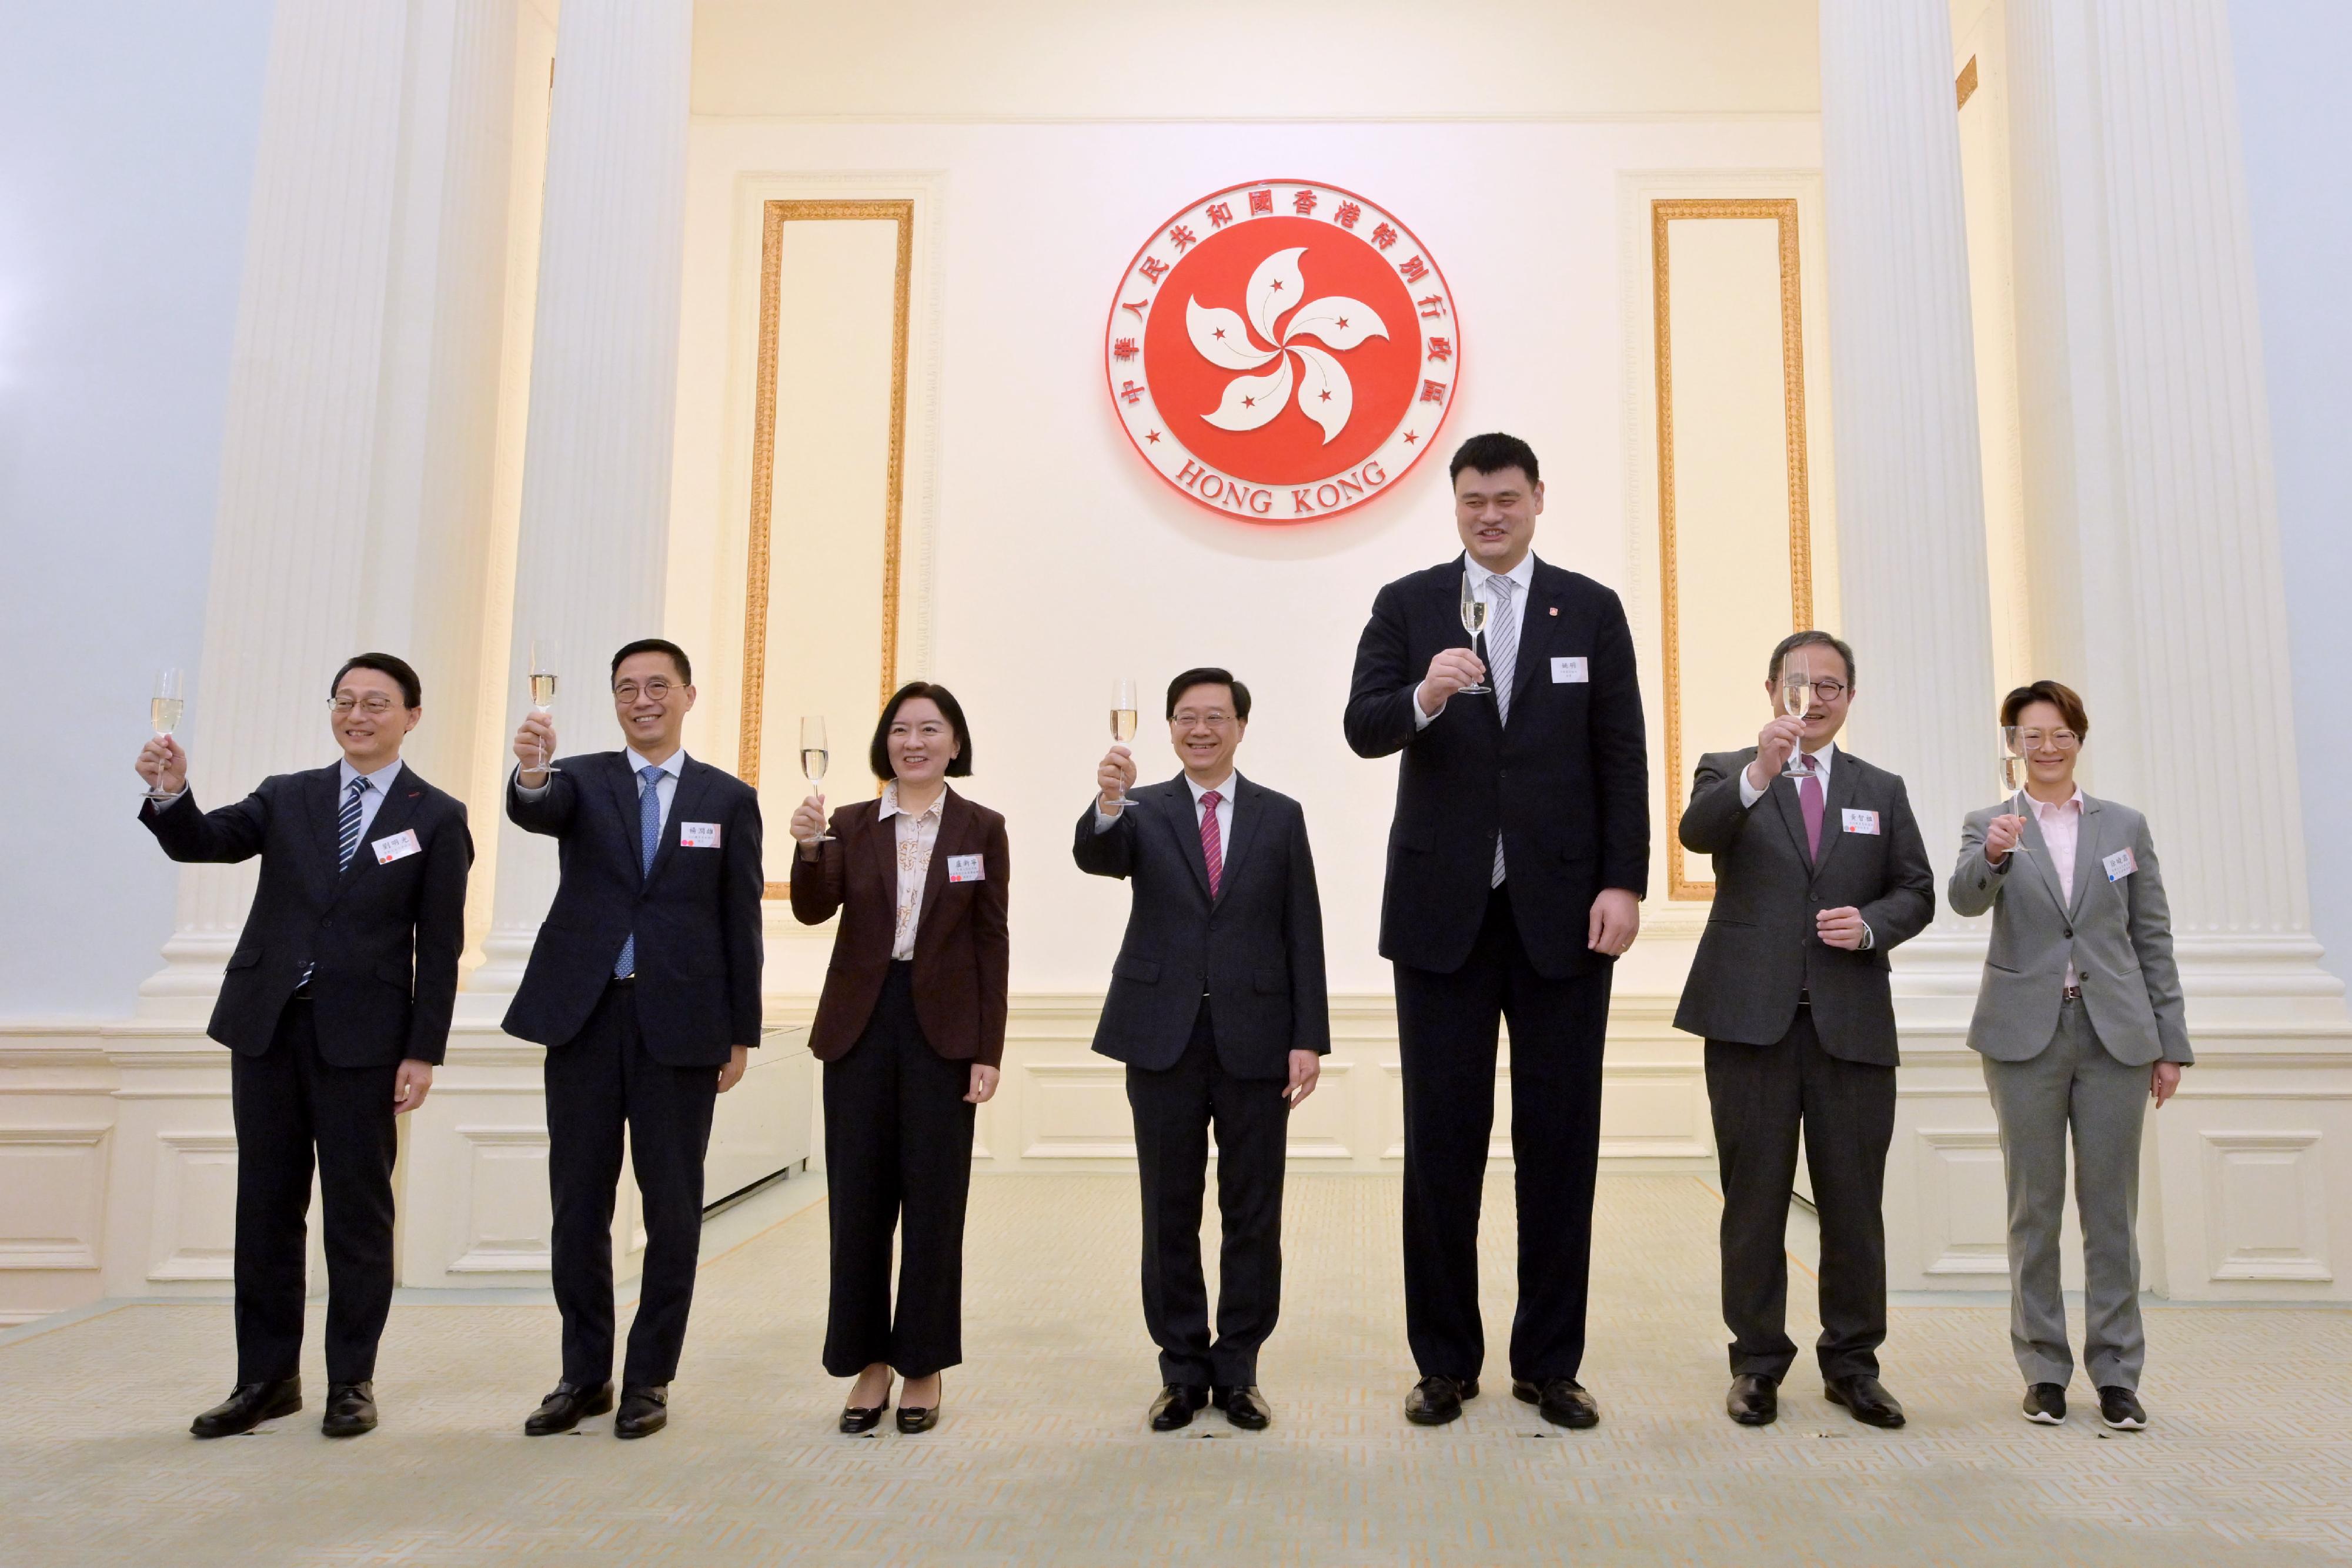 The Chief Executive, Mr John Lee, today (February 26) hosted a dinner at Government House in welcoming the national men’s basketball team playing home matches in Hong Kong. Photo shows Mr Lee (centre); Deputy Director of the Liaison Office of the Central People’s Government in the Hong Kong Special Administrative Region Ms Lu Xinning (third left); the President of the China Basketball Association and the Manager of Team China, Mr Yao Ming (third right); the Secretary for Culture, Sports and Tourism, Mr Kevin Yeung (second left); the Permanent Secretary for Culture, Sports and Tourism, Mr Joe Wong (second right); the Director of Leisure and Cultural Services, Mr Vincent Liu (first left); and the Deputy Director of Leisure and Cultural Services (Leisure Services), Miss Winnie Chui (first right), toasting at the dinner.